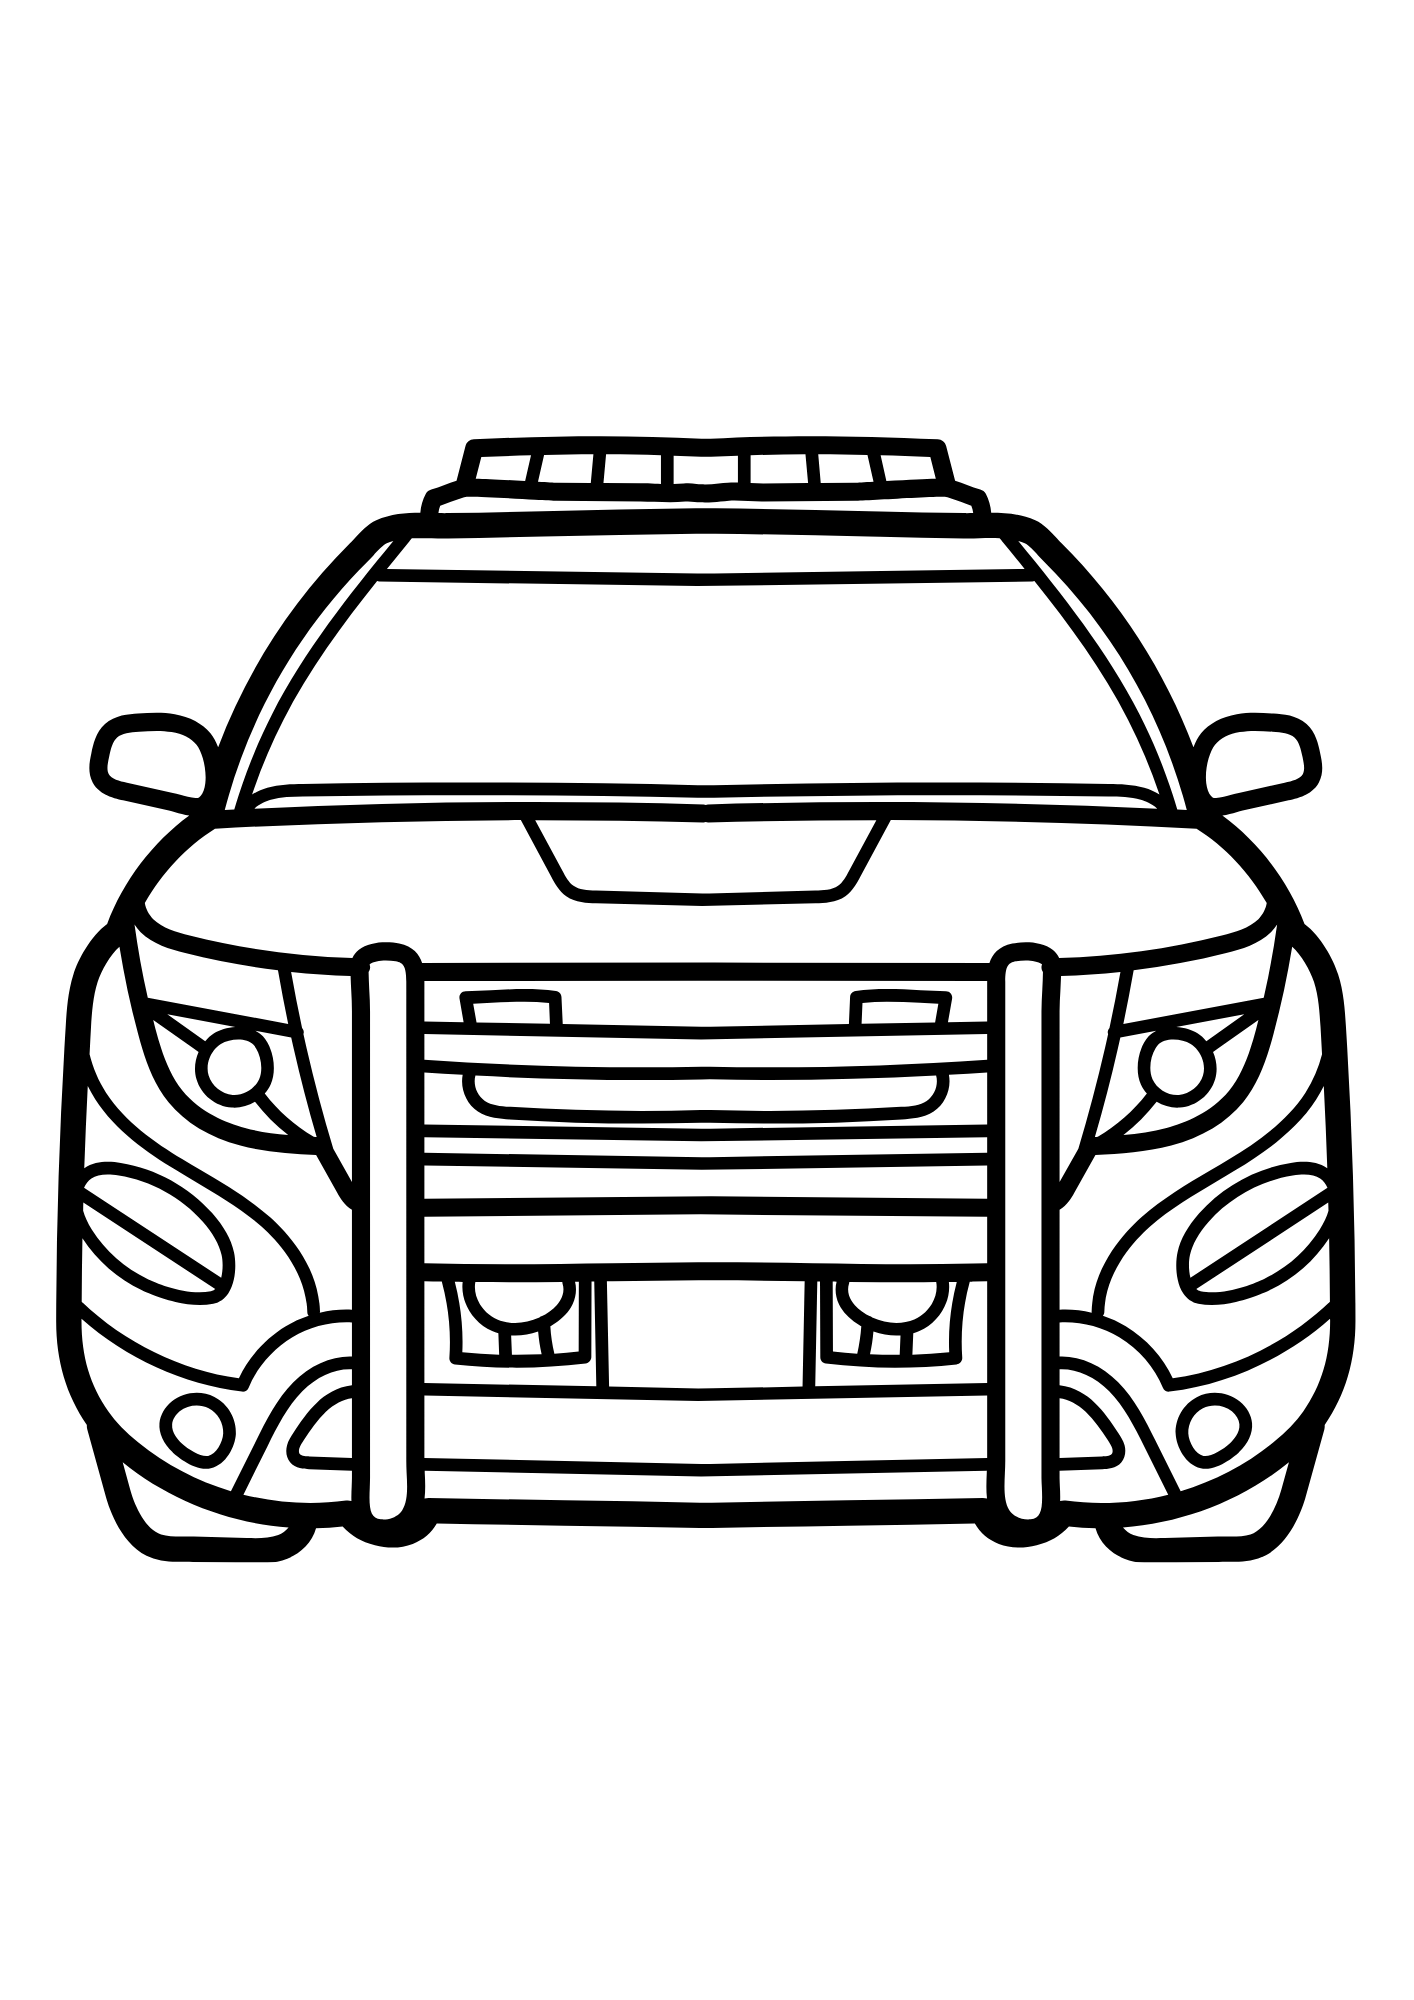 Police Car Image Coloring Pages